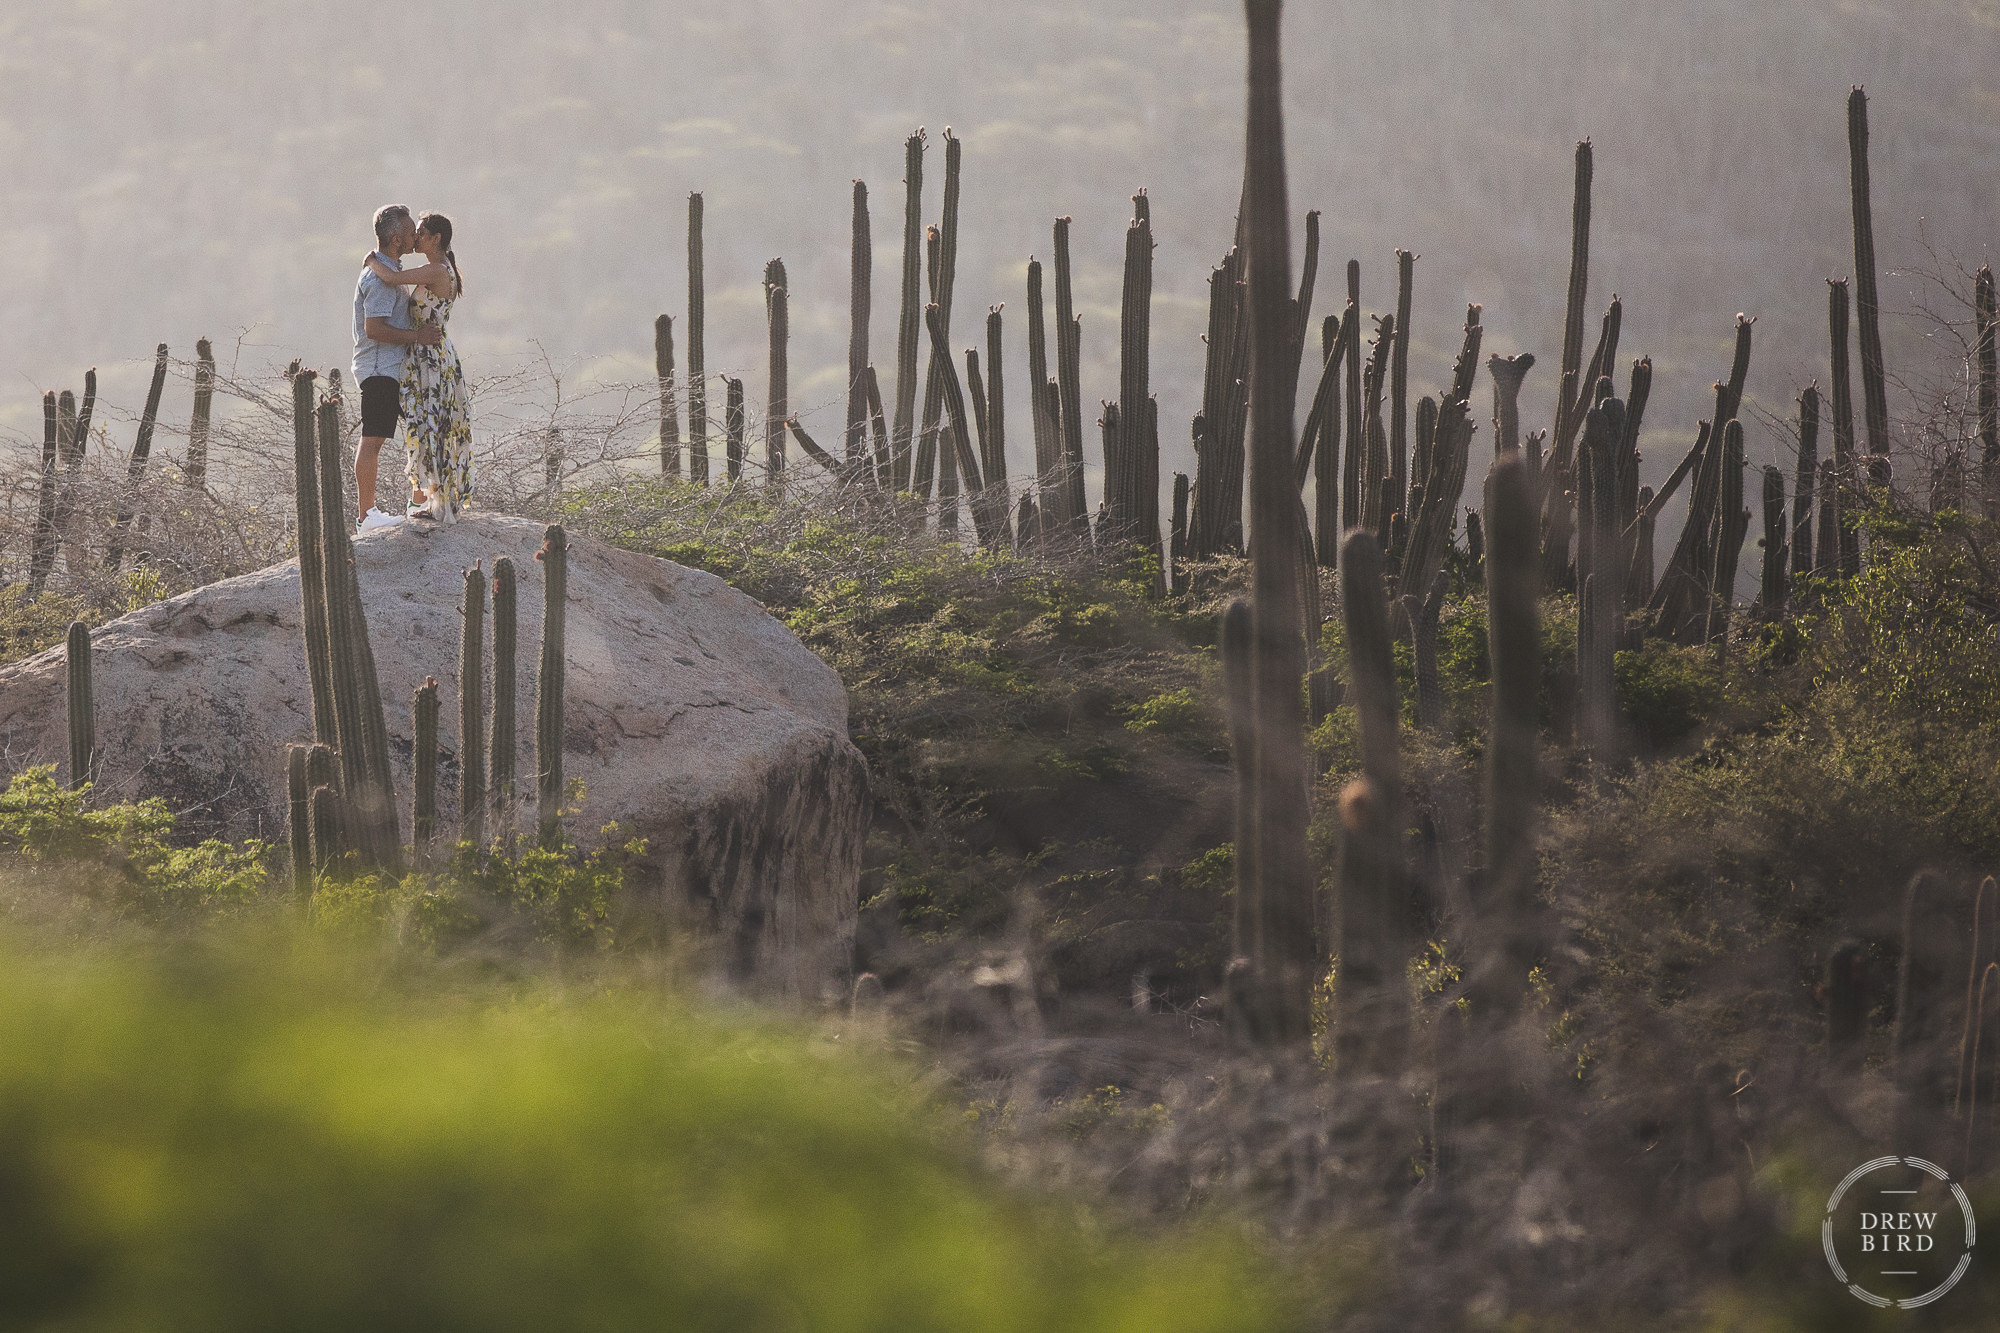 Hindu wedding bride and groom kissing on top of a rock surrounded by cactus for Indian destination wedding photography story in Aruba.